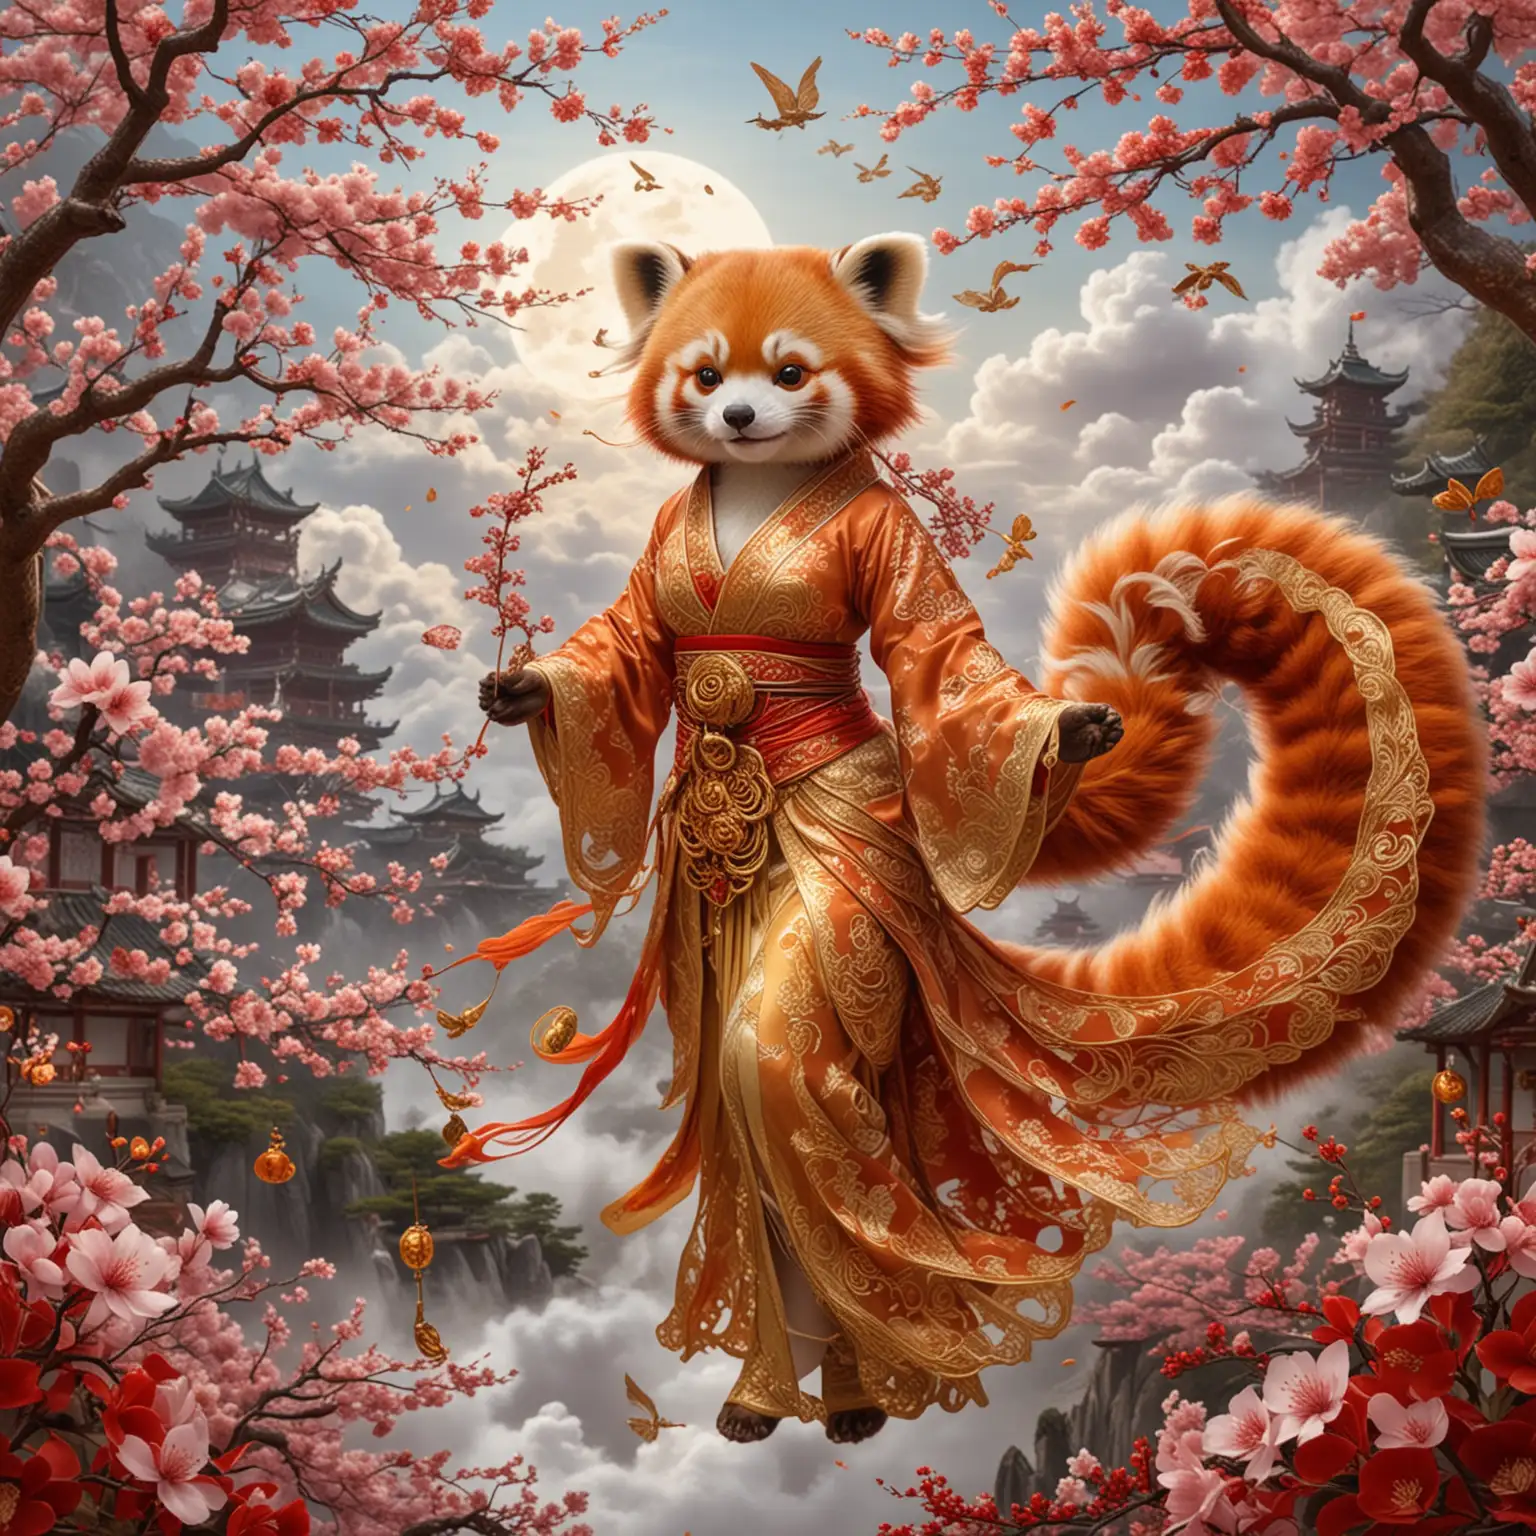 Elegant Red Panda Lady with Nine Tails adorned in Golden Wire Lace amidst Cherry Blossoms and a Smiling Cloud Dragon